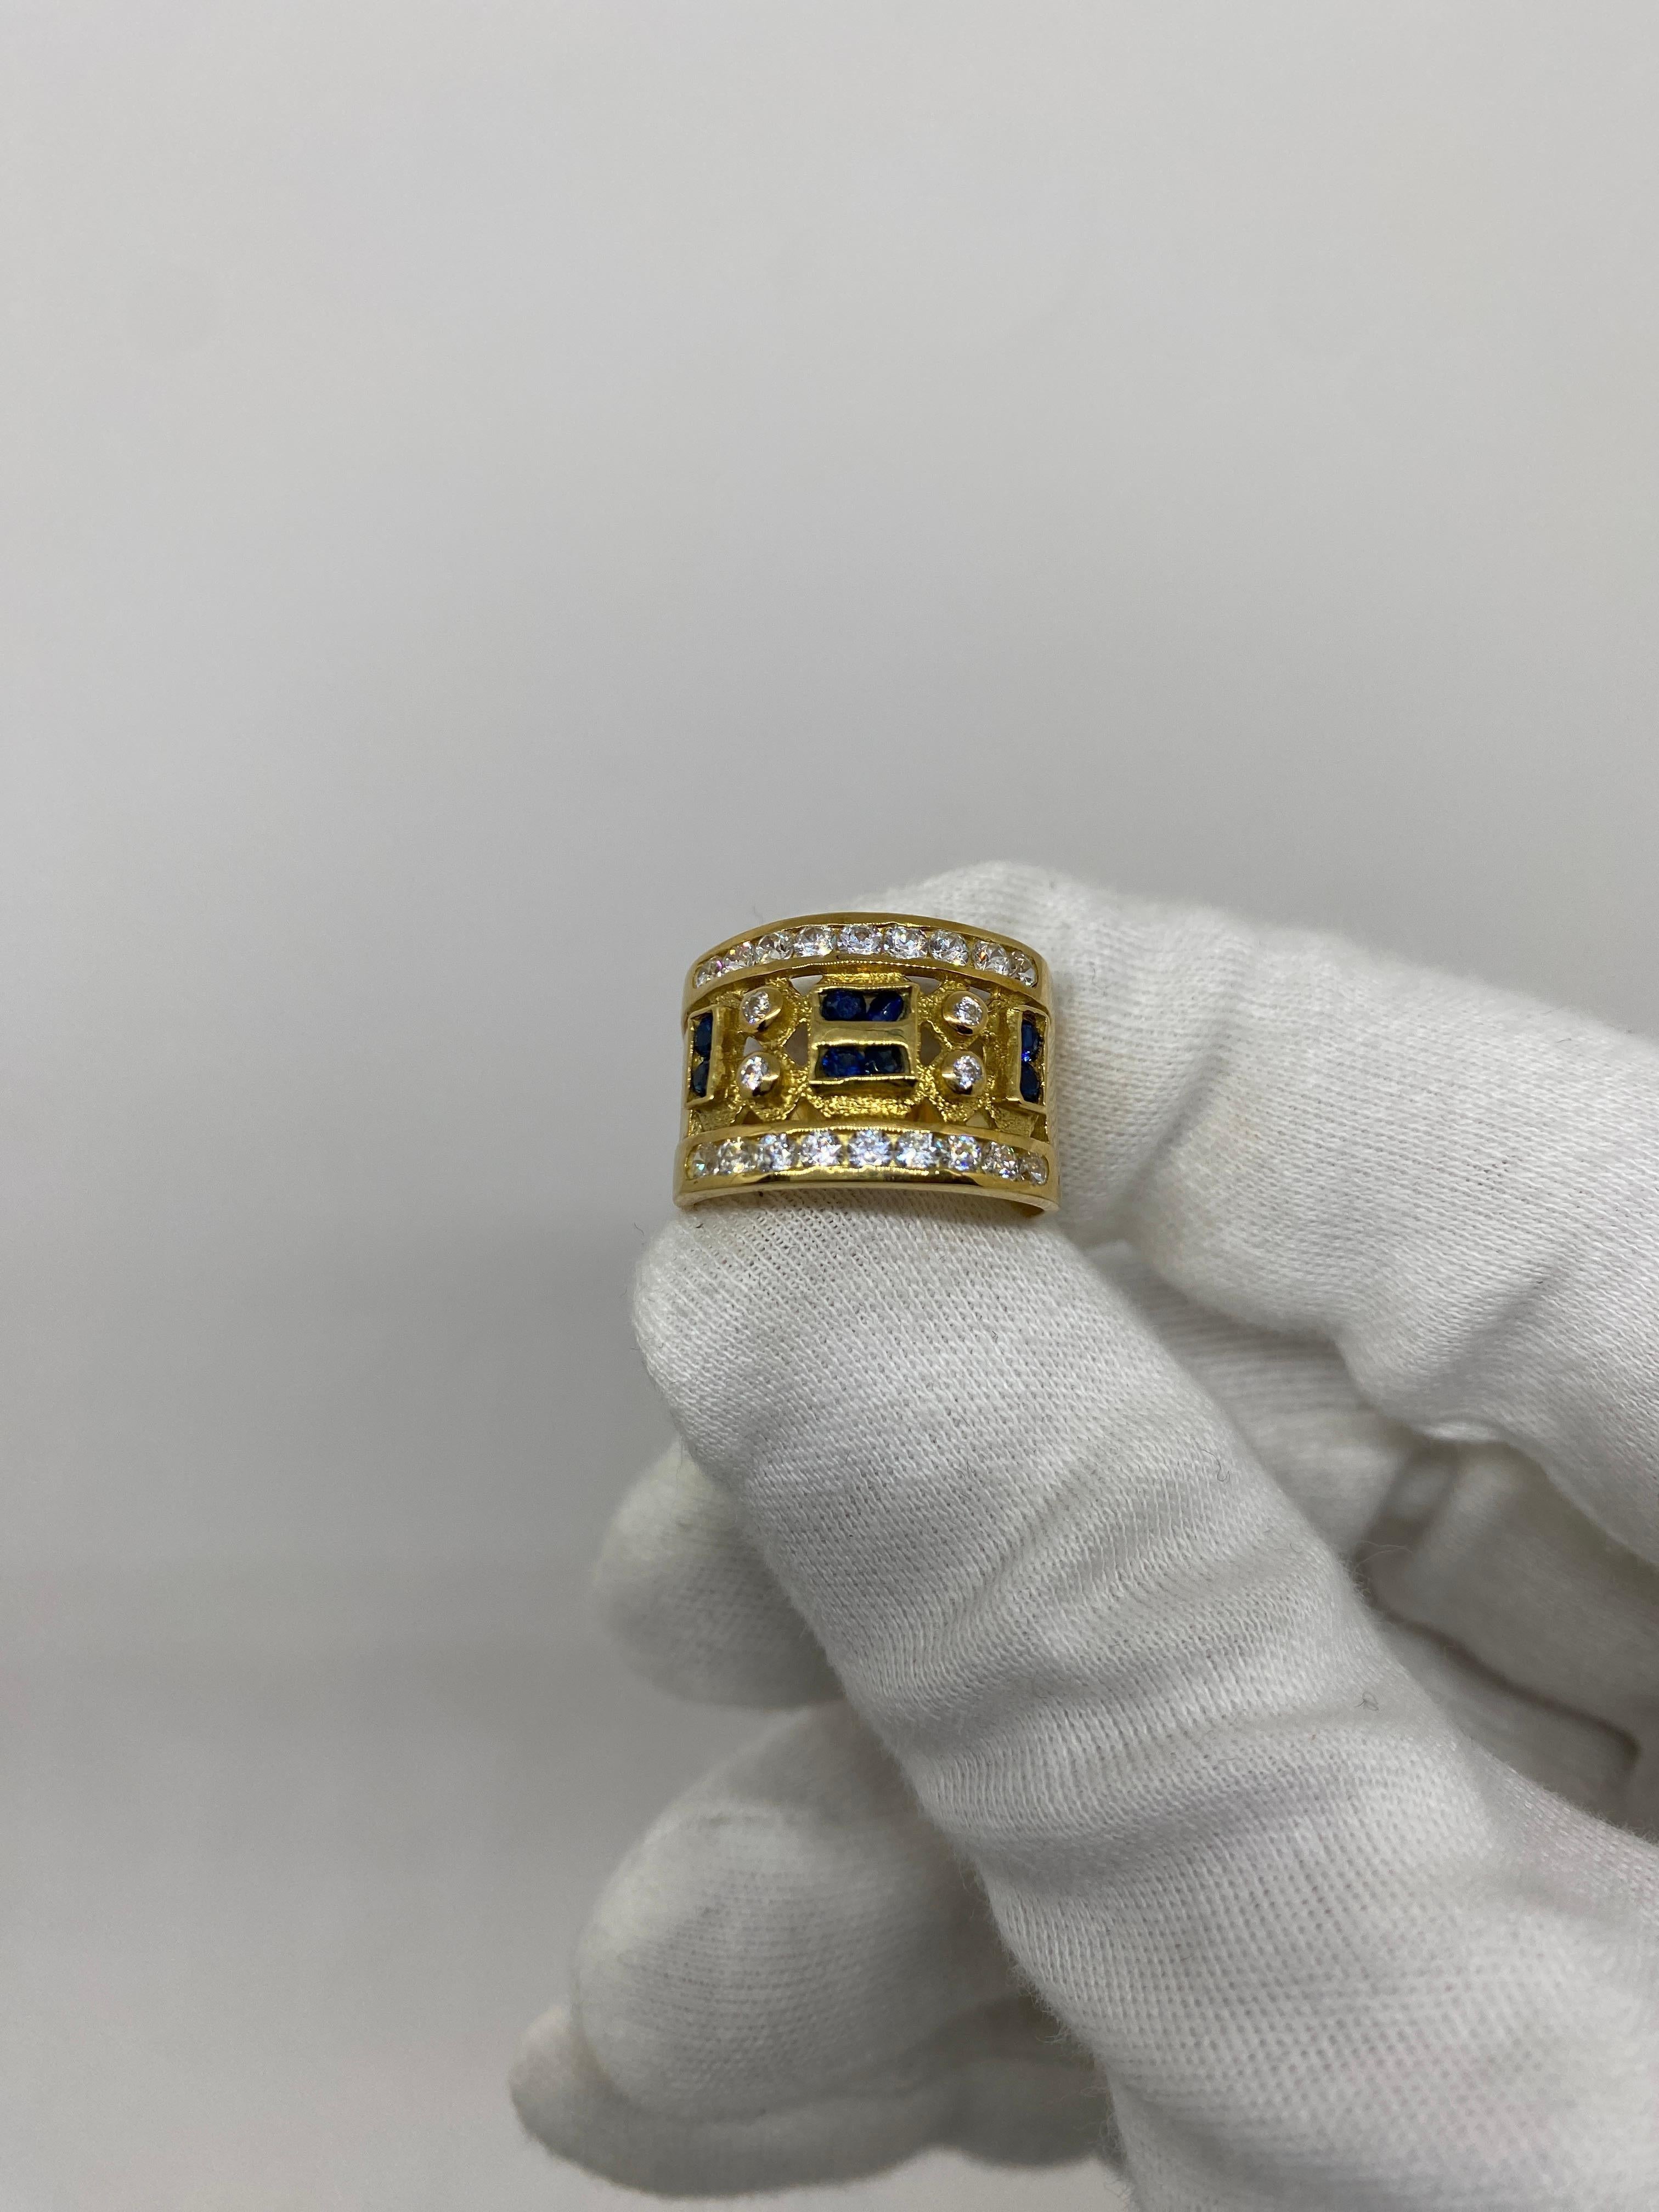 Ring made of 18kt yellow gold with natural blue baguette-cut sapphires for ct.0.66 and natural white brilliant-cut diamonds for ct.0.57

Welcome to our jewelry collection, where every piece tells a story of timeless elegance and unparalleled